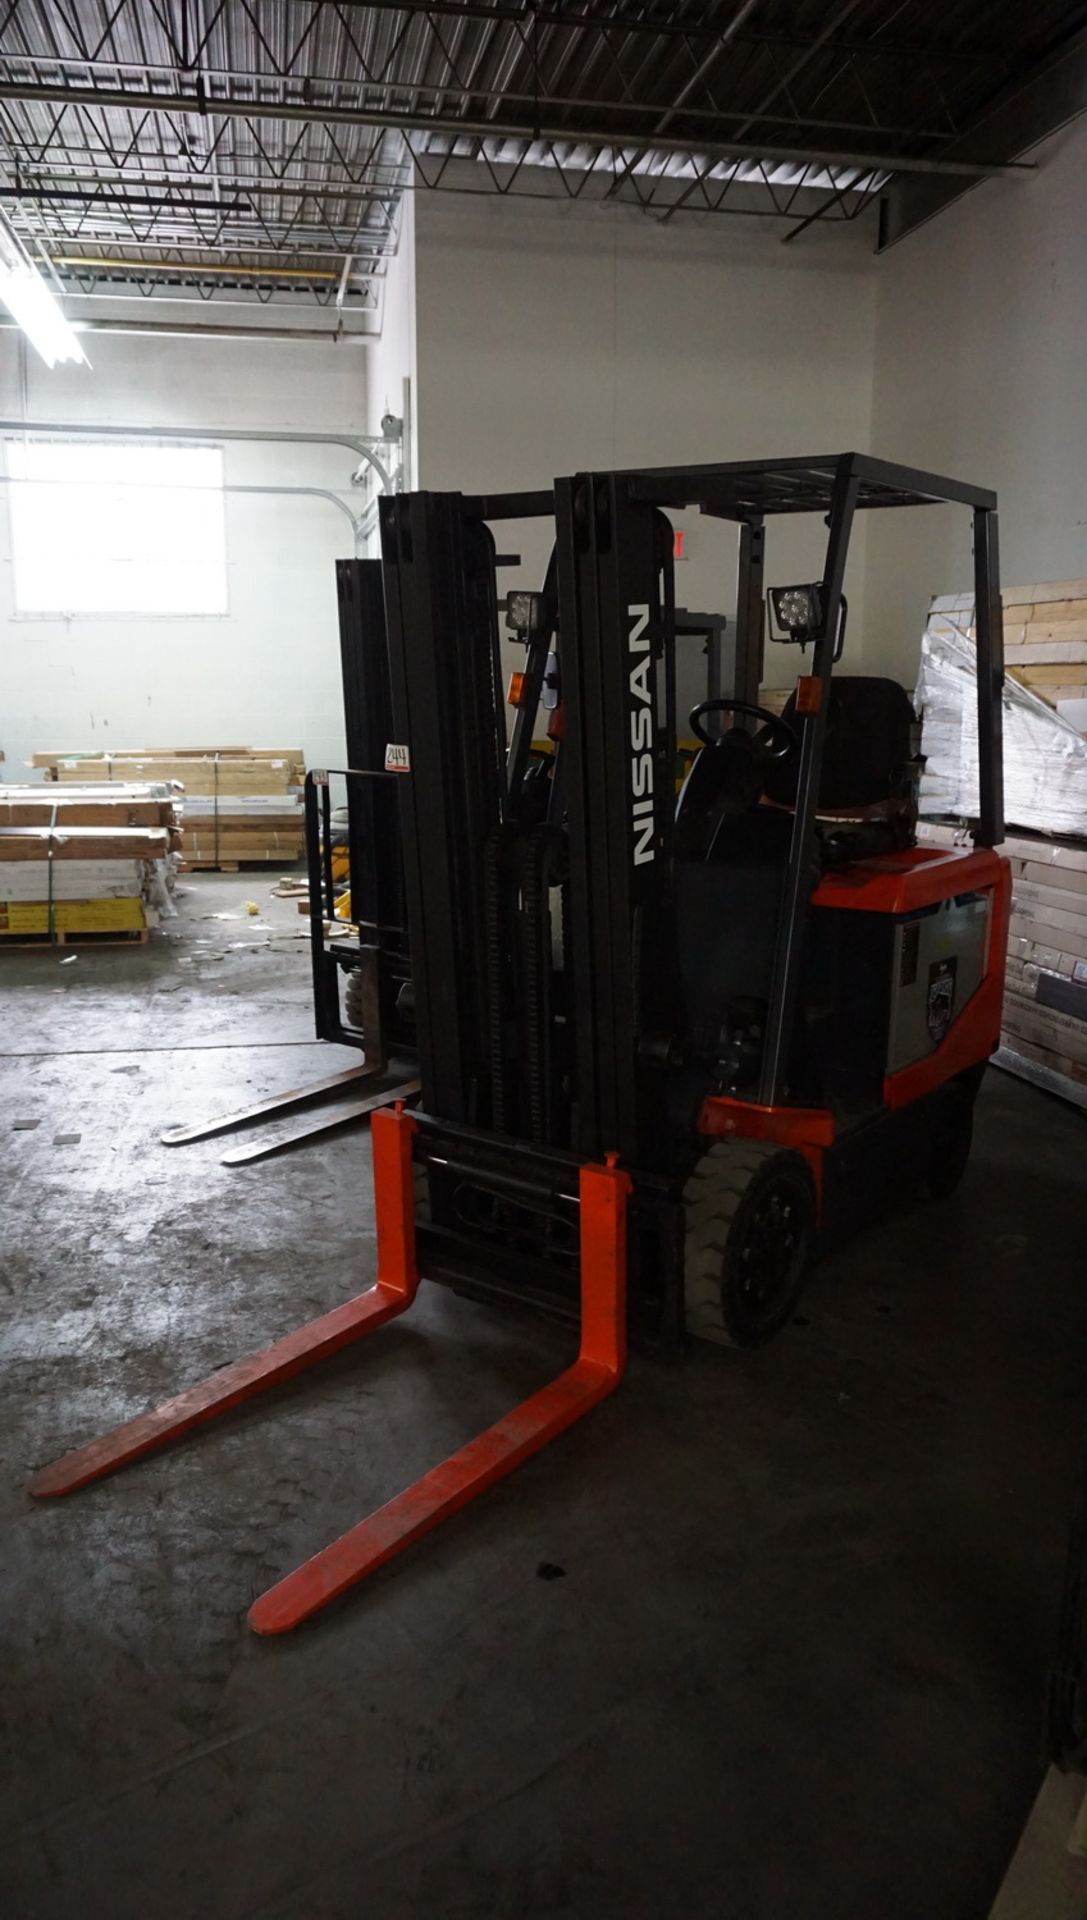 NISSAN CP1B2L25BS ELECTRIC 5,000LBS CAP FORKLIFT W/ 187" LIFT, 3-STAGE MAST, SIDE SHIFT, S/N CP1B2- - Image 7 of 10